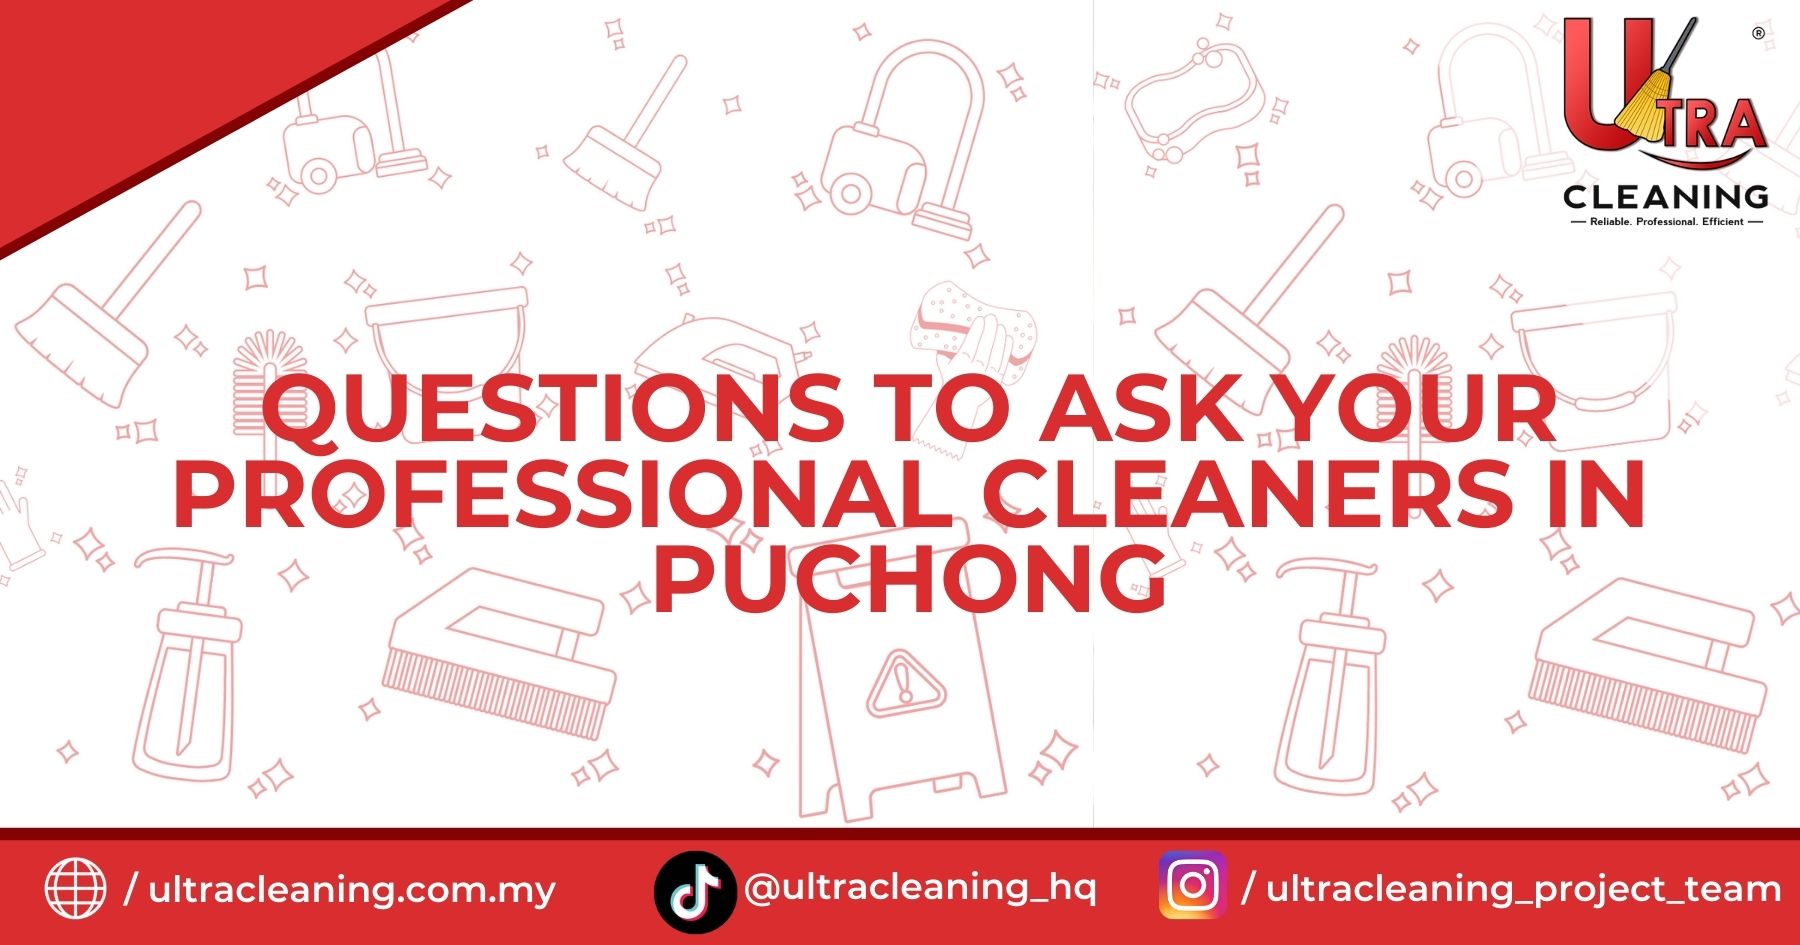 Questions to Ask Your Professional Cleaners in Puchong